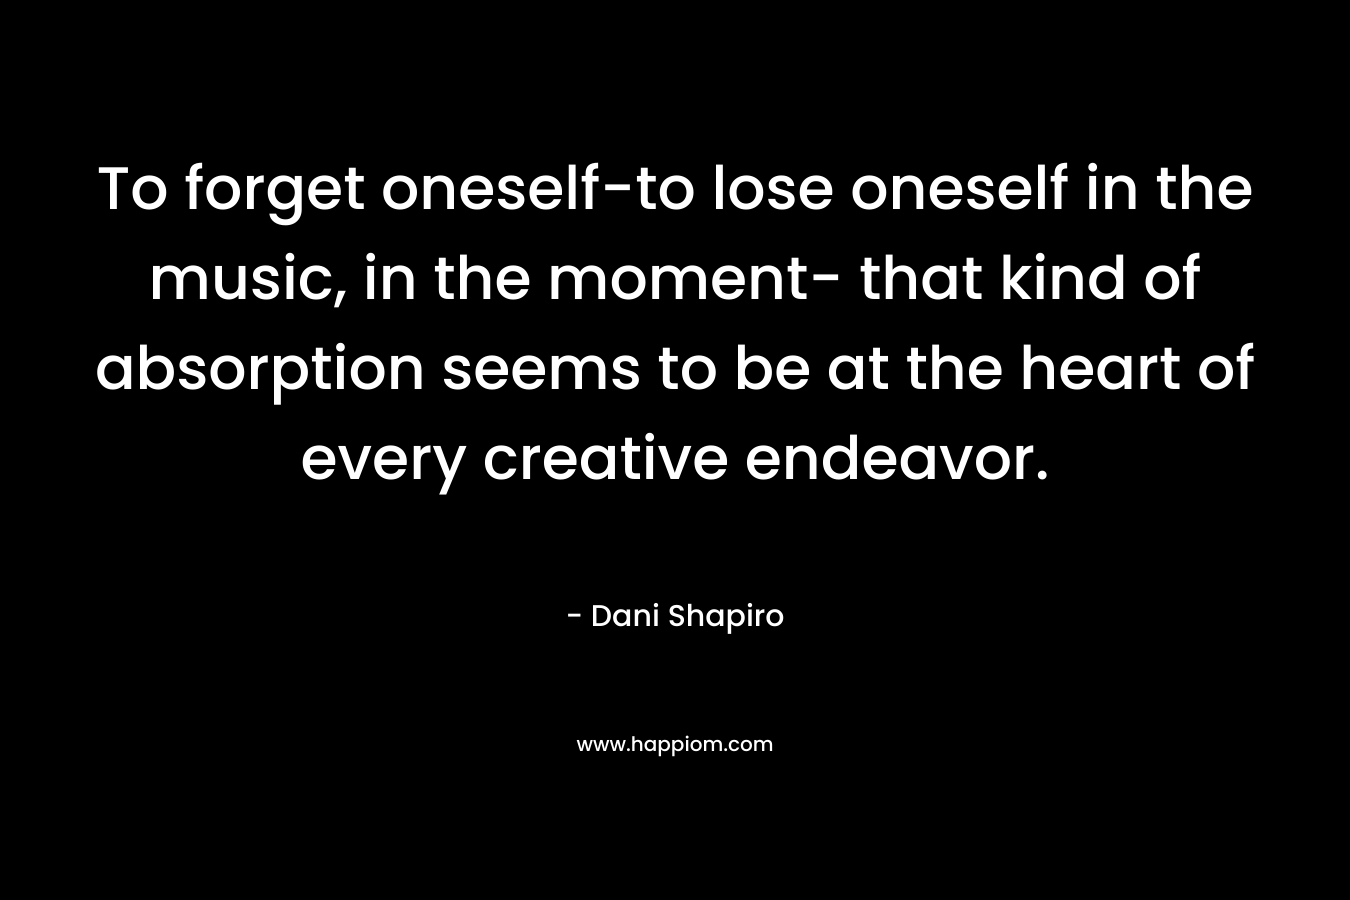 To forget oneself-to lose oneself in the music, in the moment- that kind of absorption seems to be at the heart of every creative endeavor. – Dani Shapiro